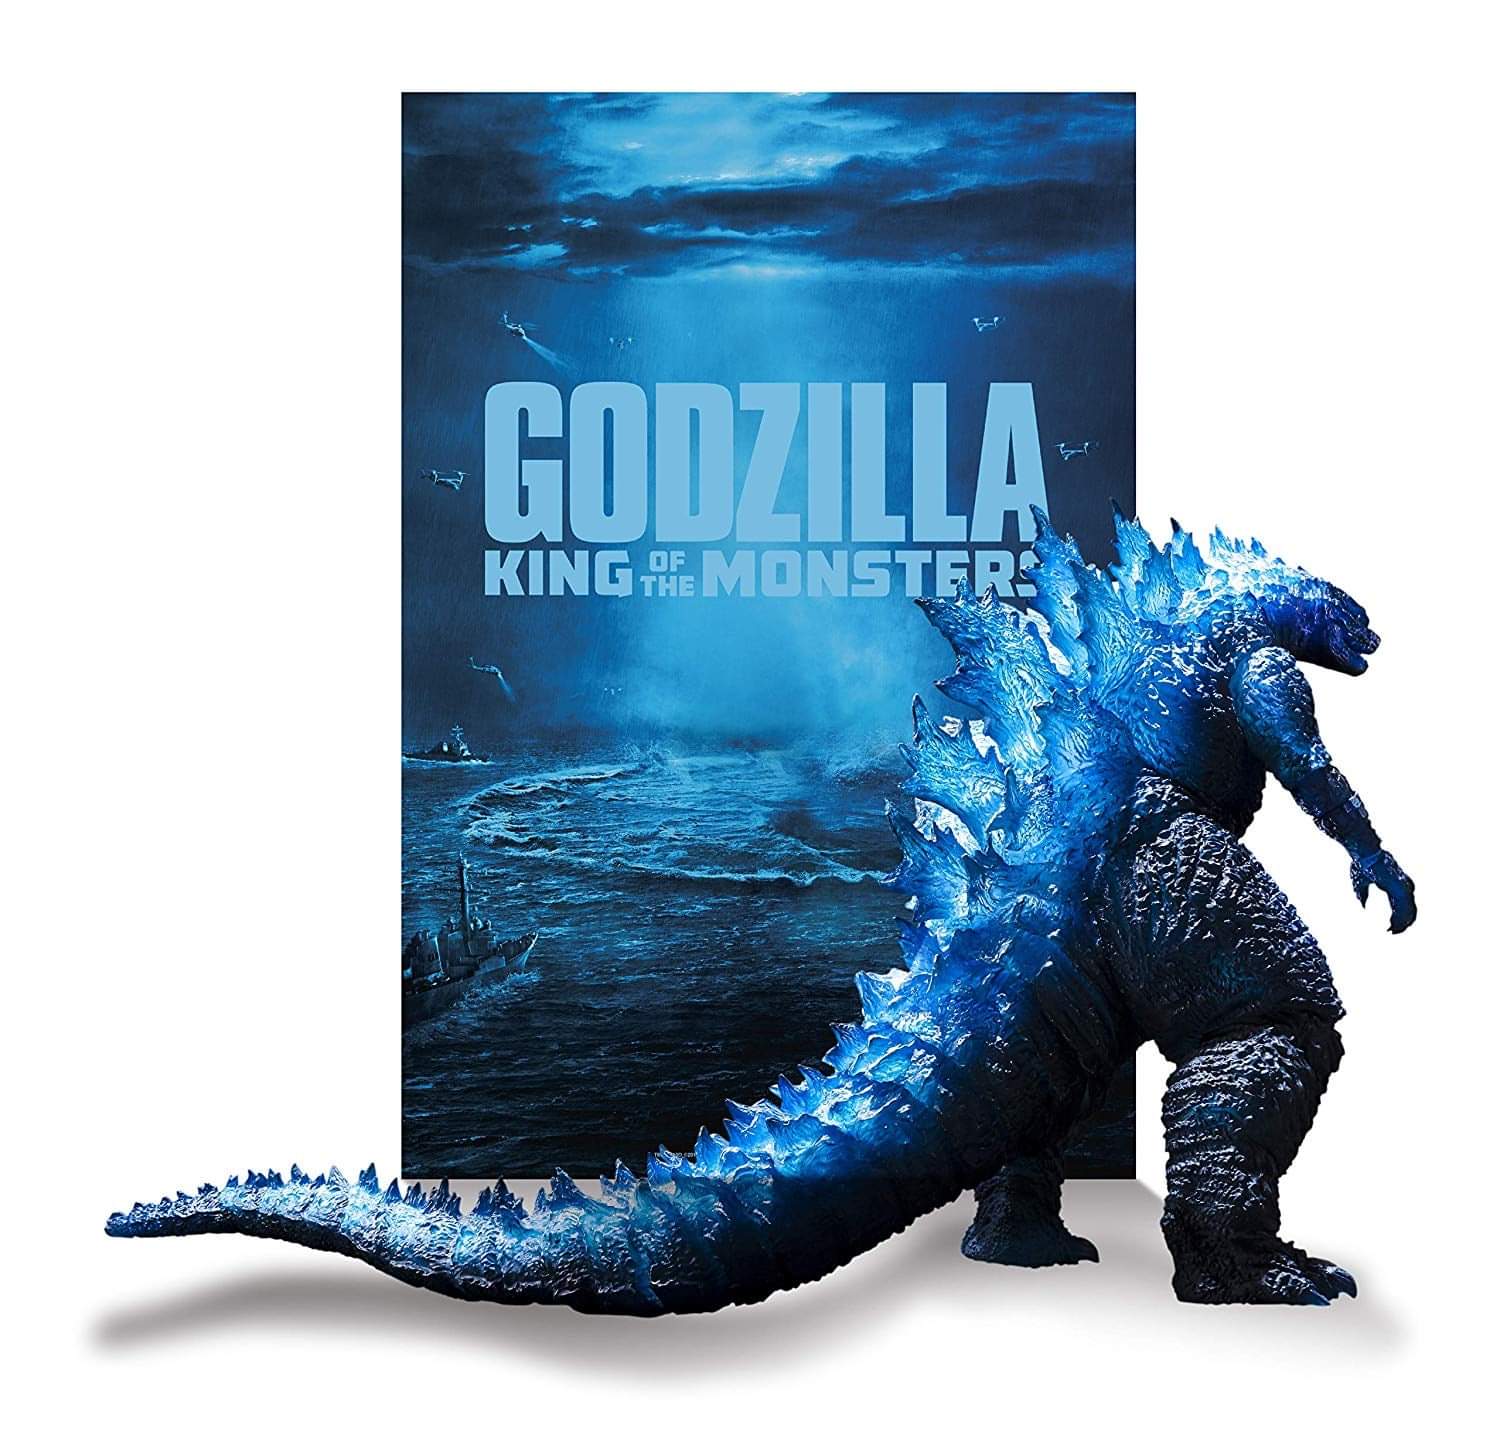 S.H. MonsterArts reveal Godzilla (2019) poster figure images!